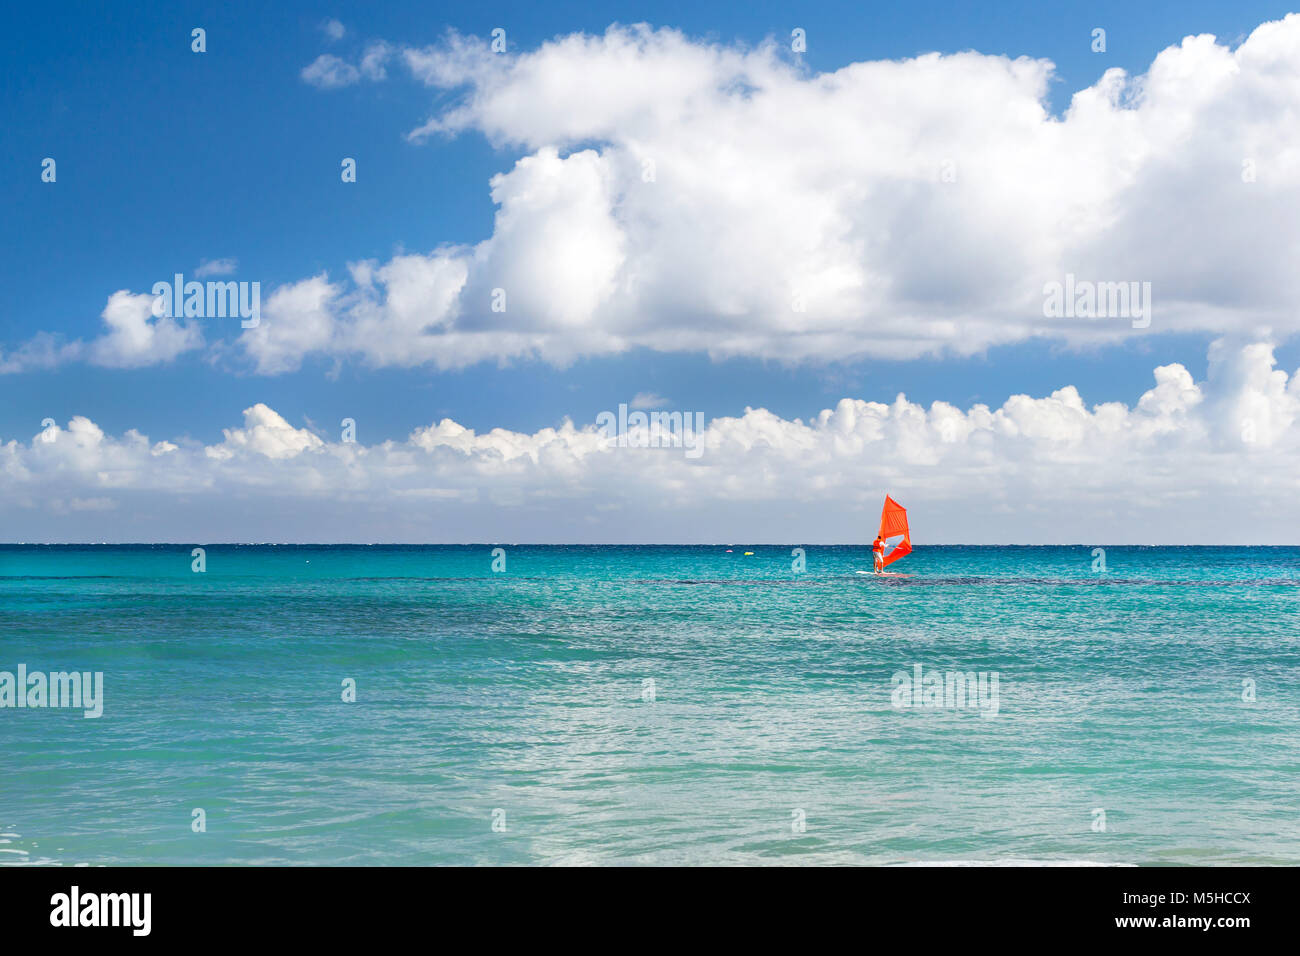 Windsurf with red sail rides on sea. View from sunny Livadi beach in resort village Bali. Rethymno, Crete Greece. Extreme water sports as active recre Stock Photo